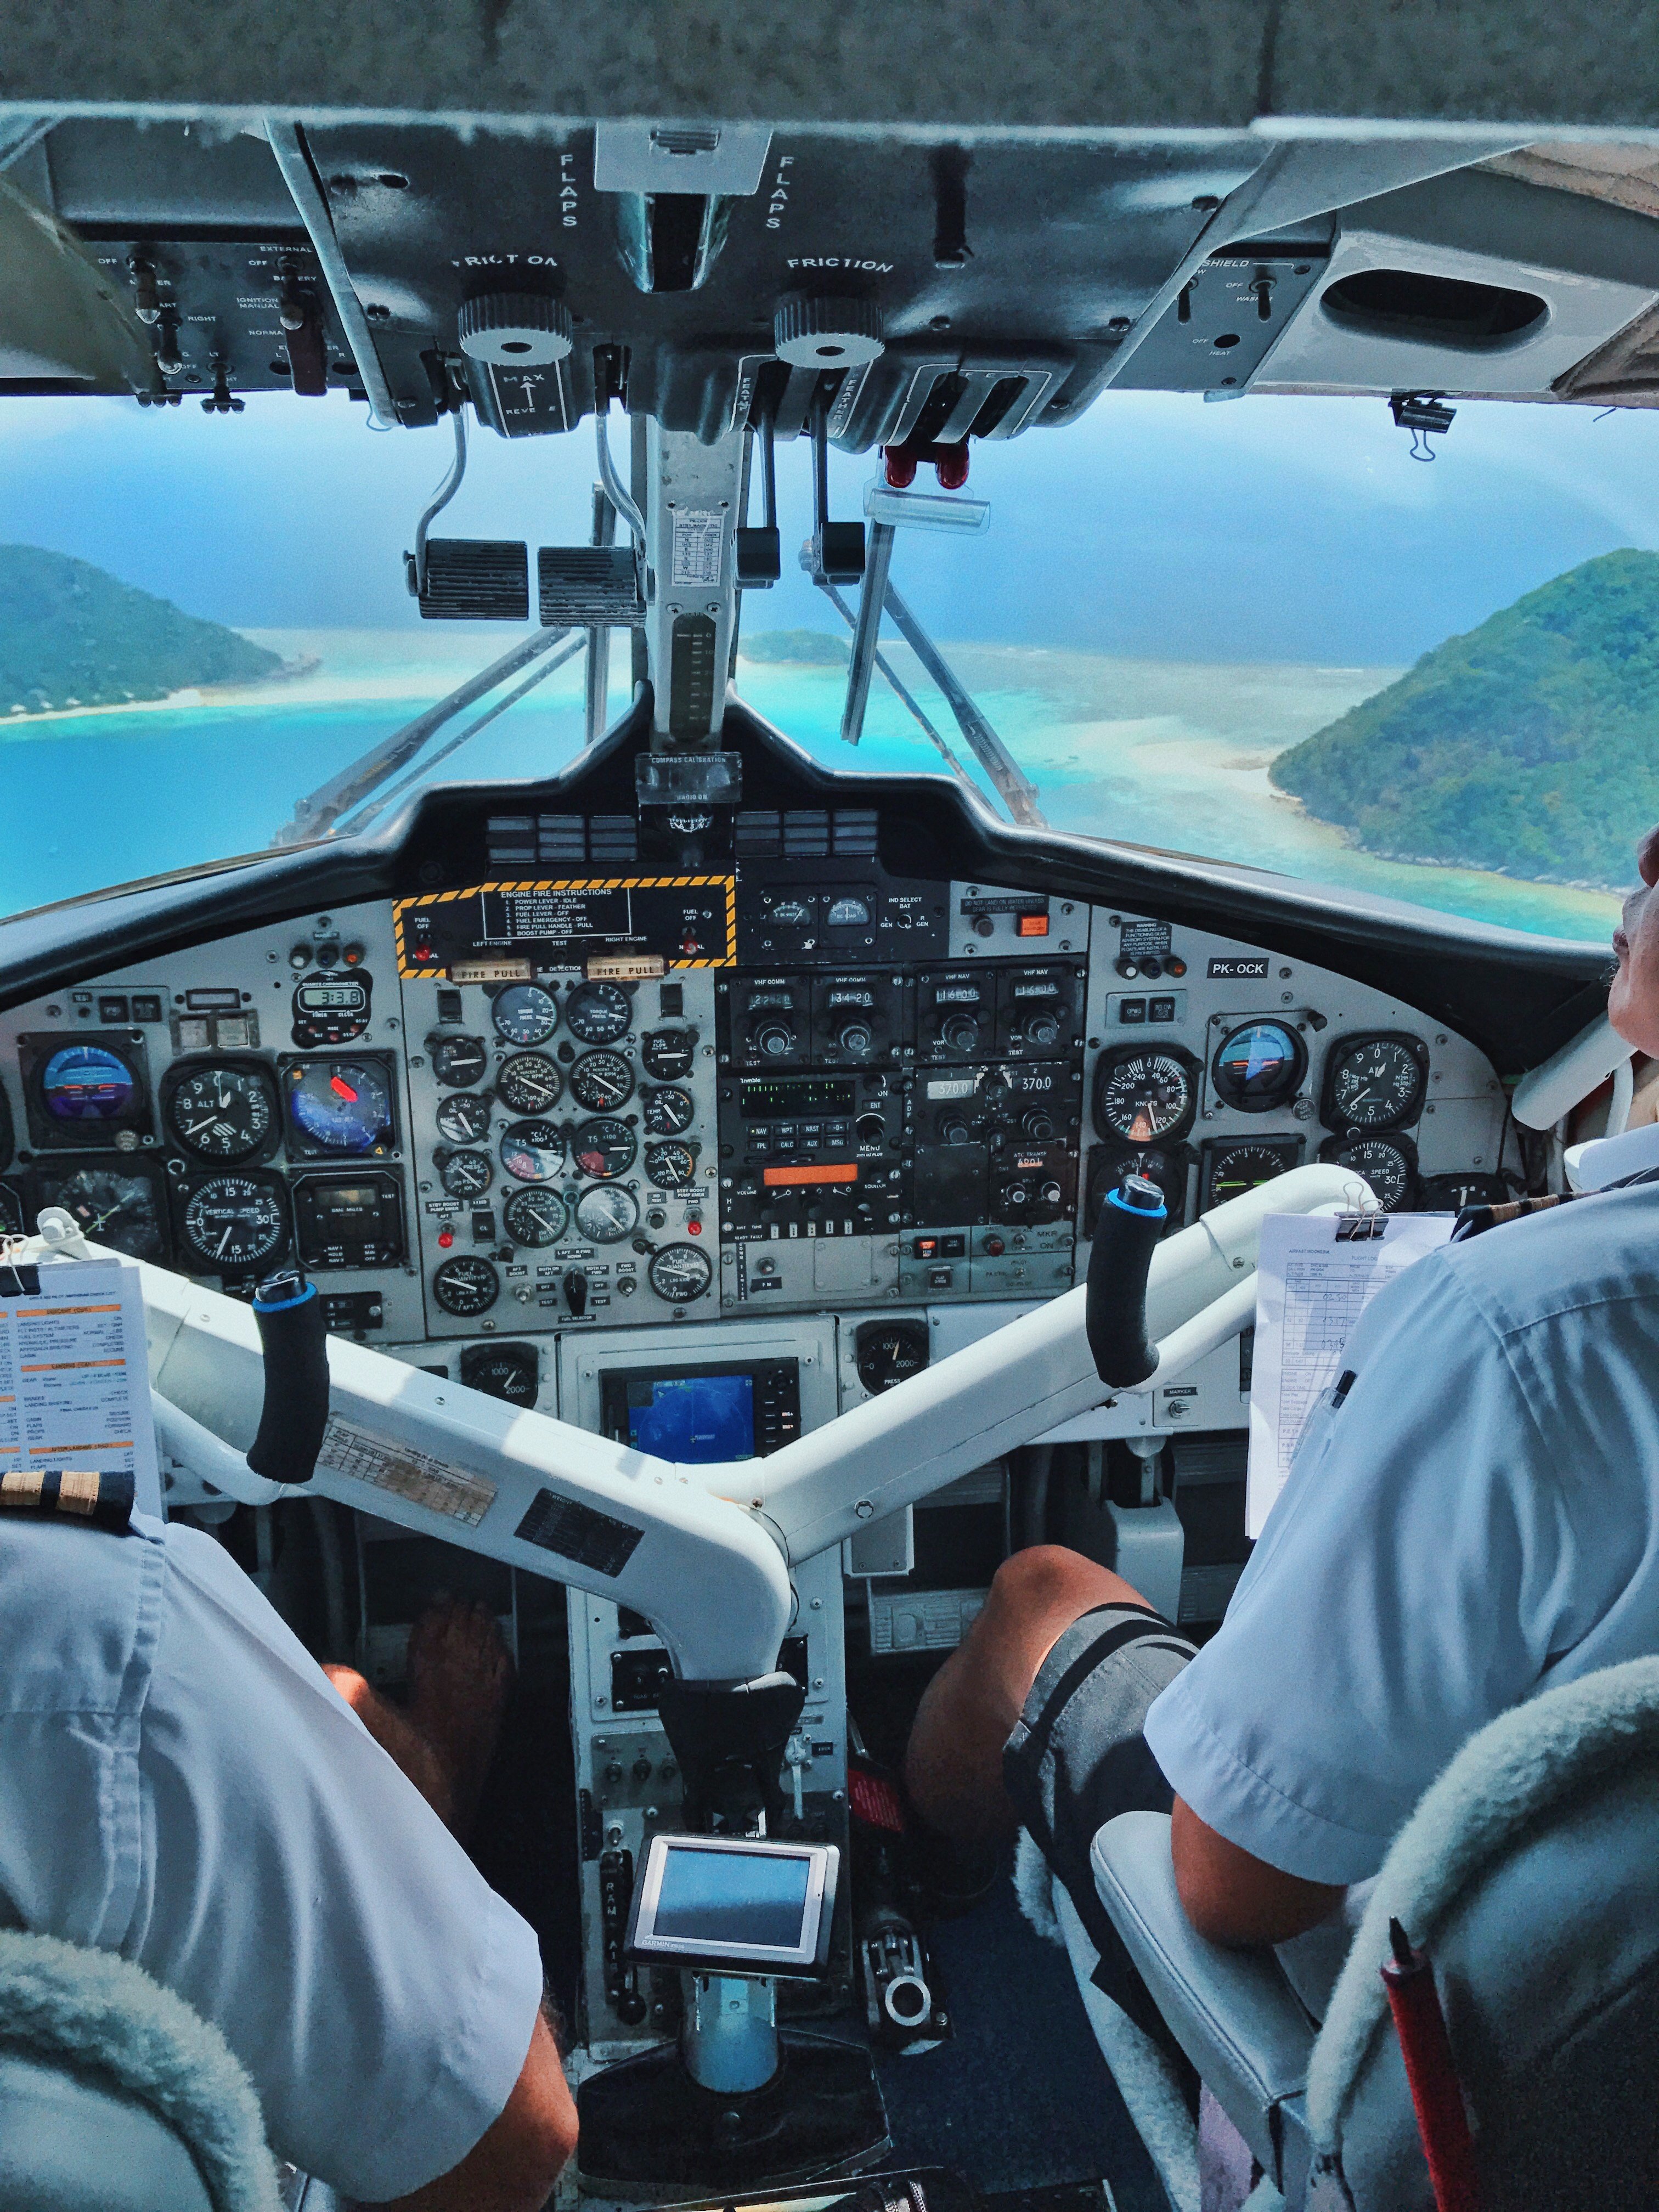 Seaplane pilots enroute to Bawah Reserve, private island resort, Indonesia